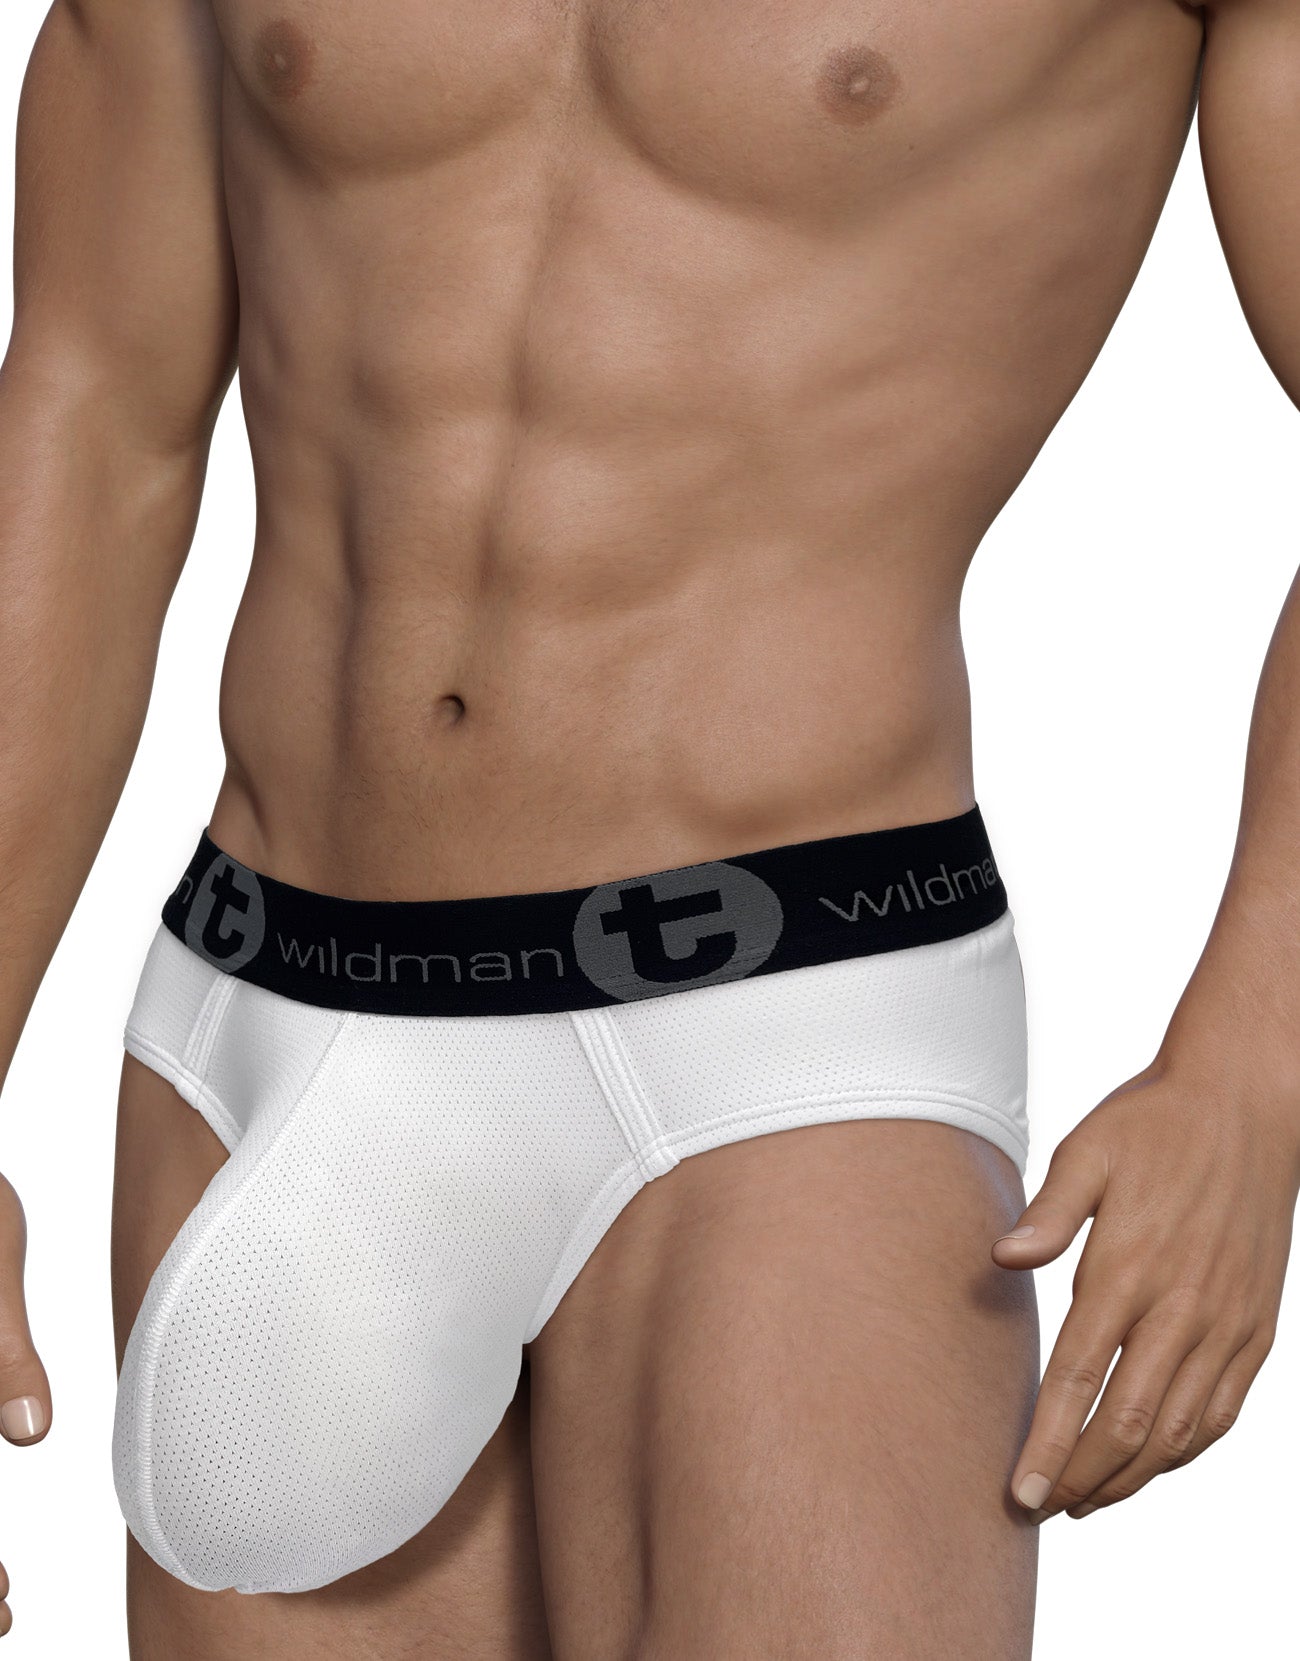 WildmanT Mesh Monster Cock Brief White - DealByEthan.gay